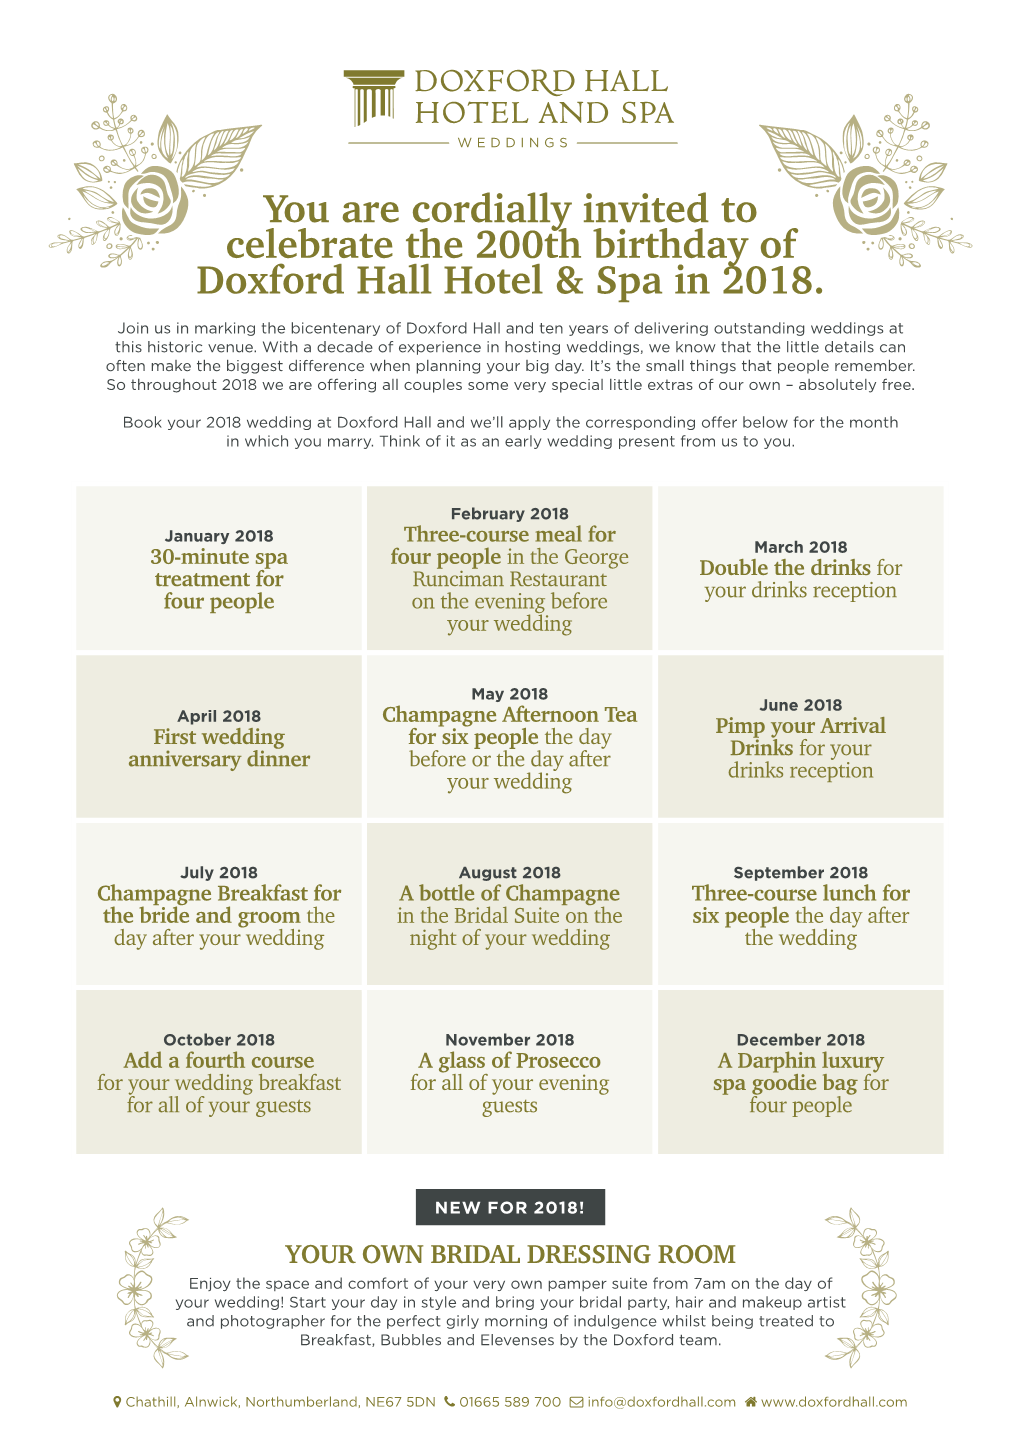 You Are Cordially Invited to Celebrate the 200Th Birthday of Doxford Hall Hotel & Spa in 2018